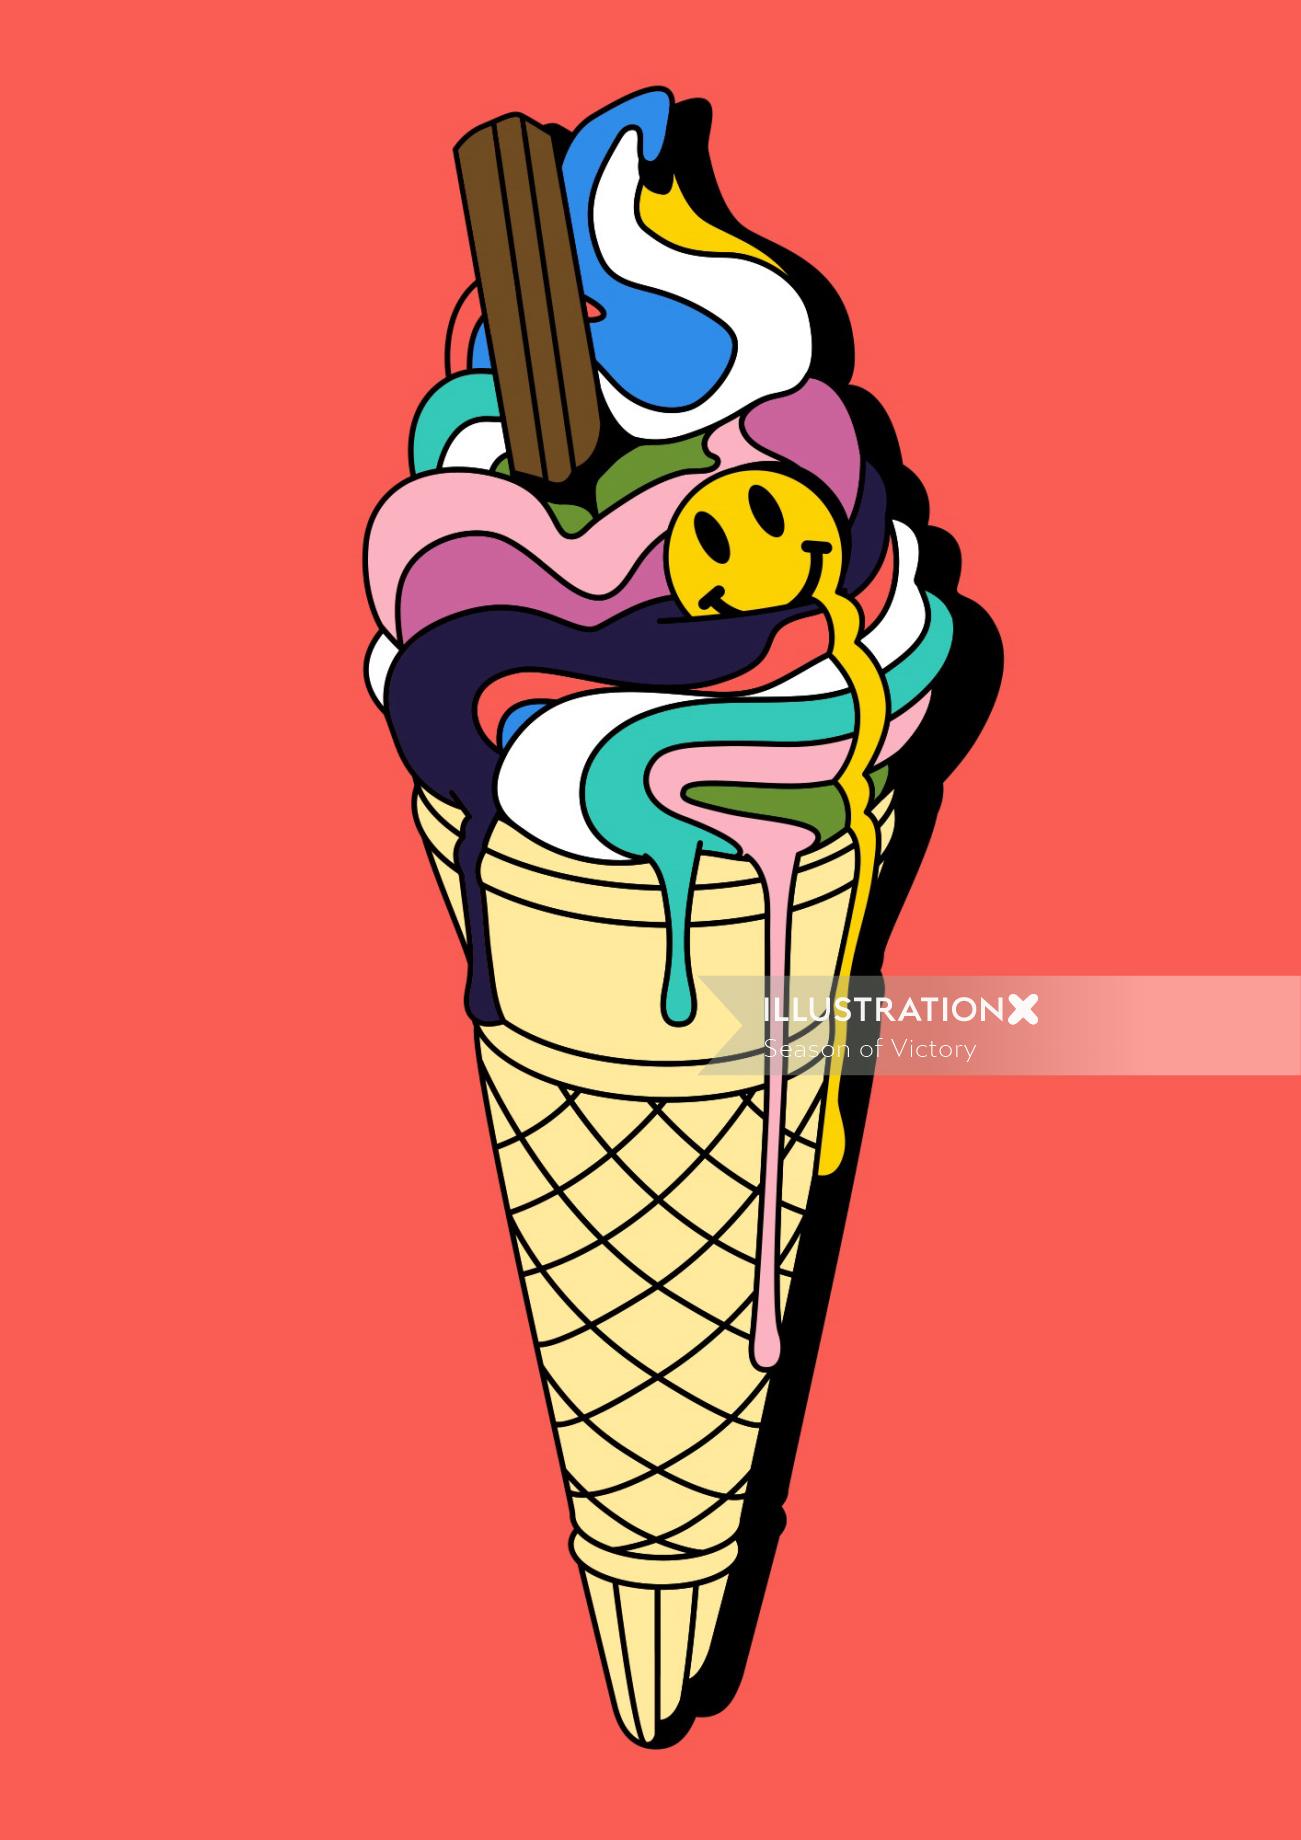 Concept artwork of Ice cream by Season of Victory